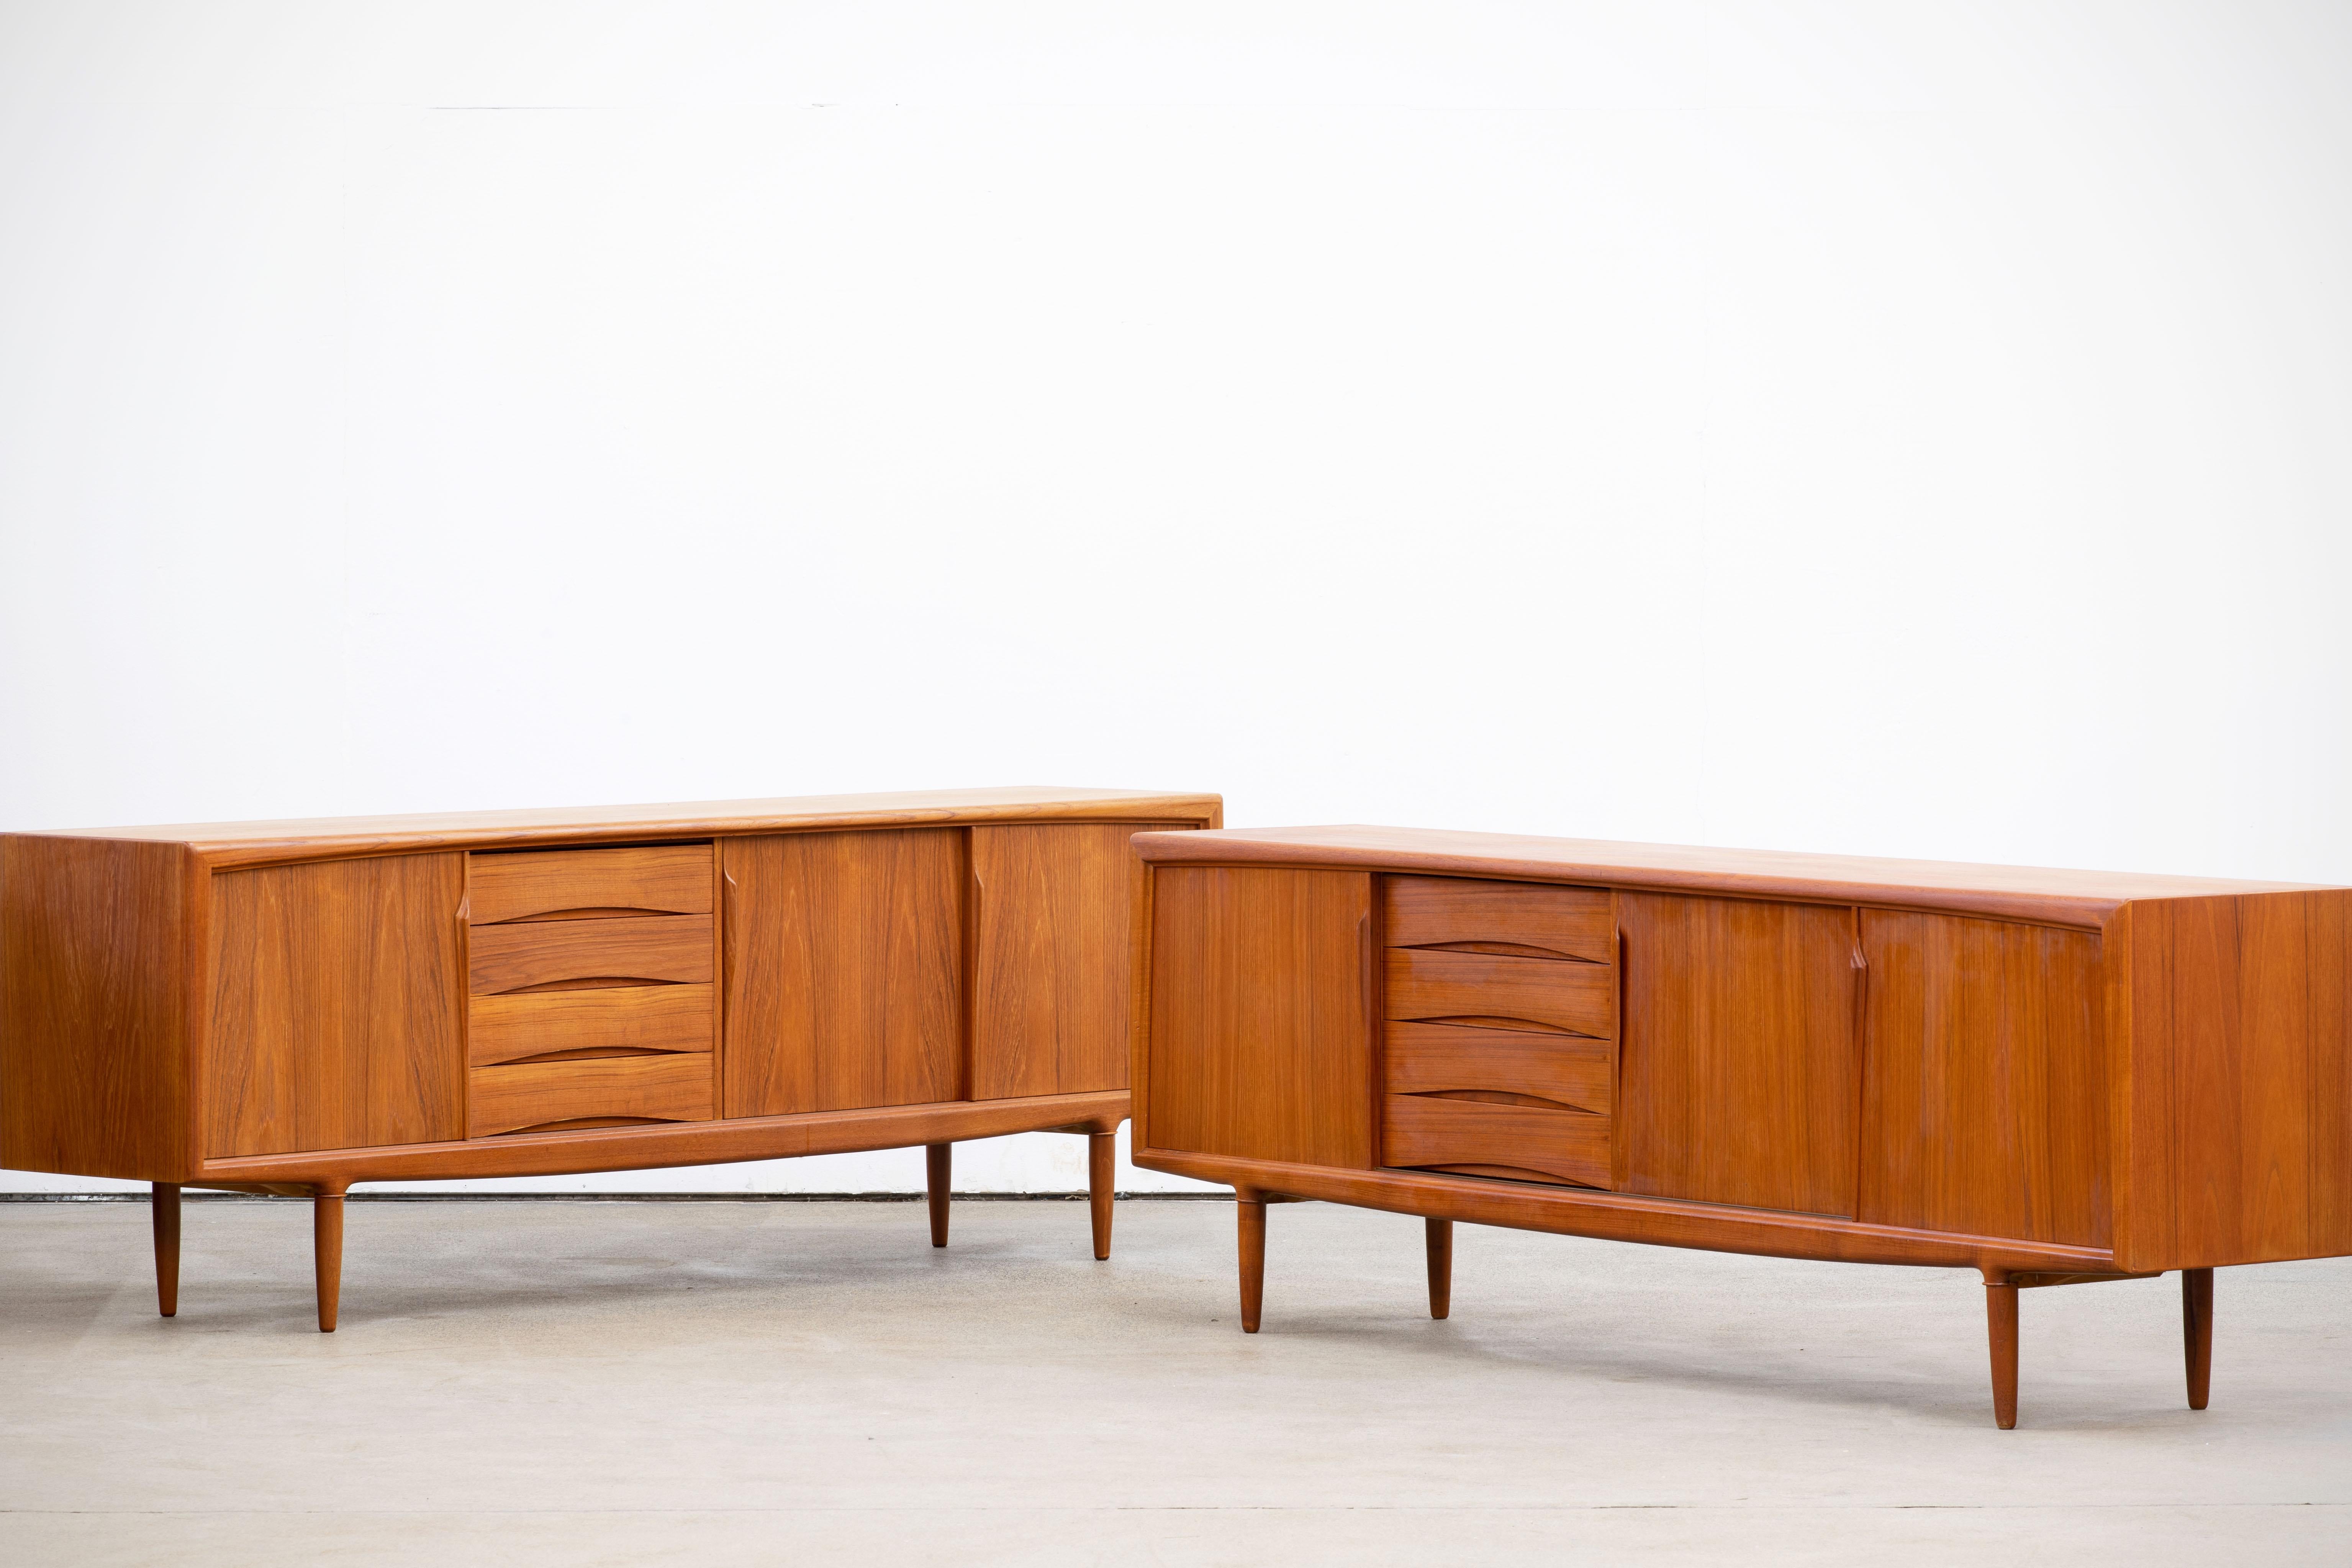 Stunning pair of midcentury designed by Gunni Omann teak sideboards by ACO Møbler, 1960s, lovely top and sliding doors, fully lined (four) drawers and stands on nice solid teak legs (this is the very scarce model that has the round legs without the